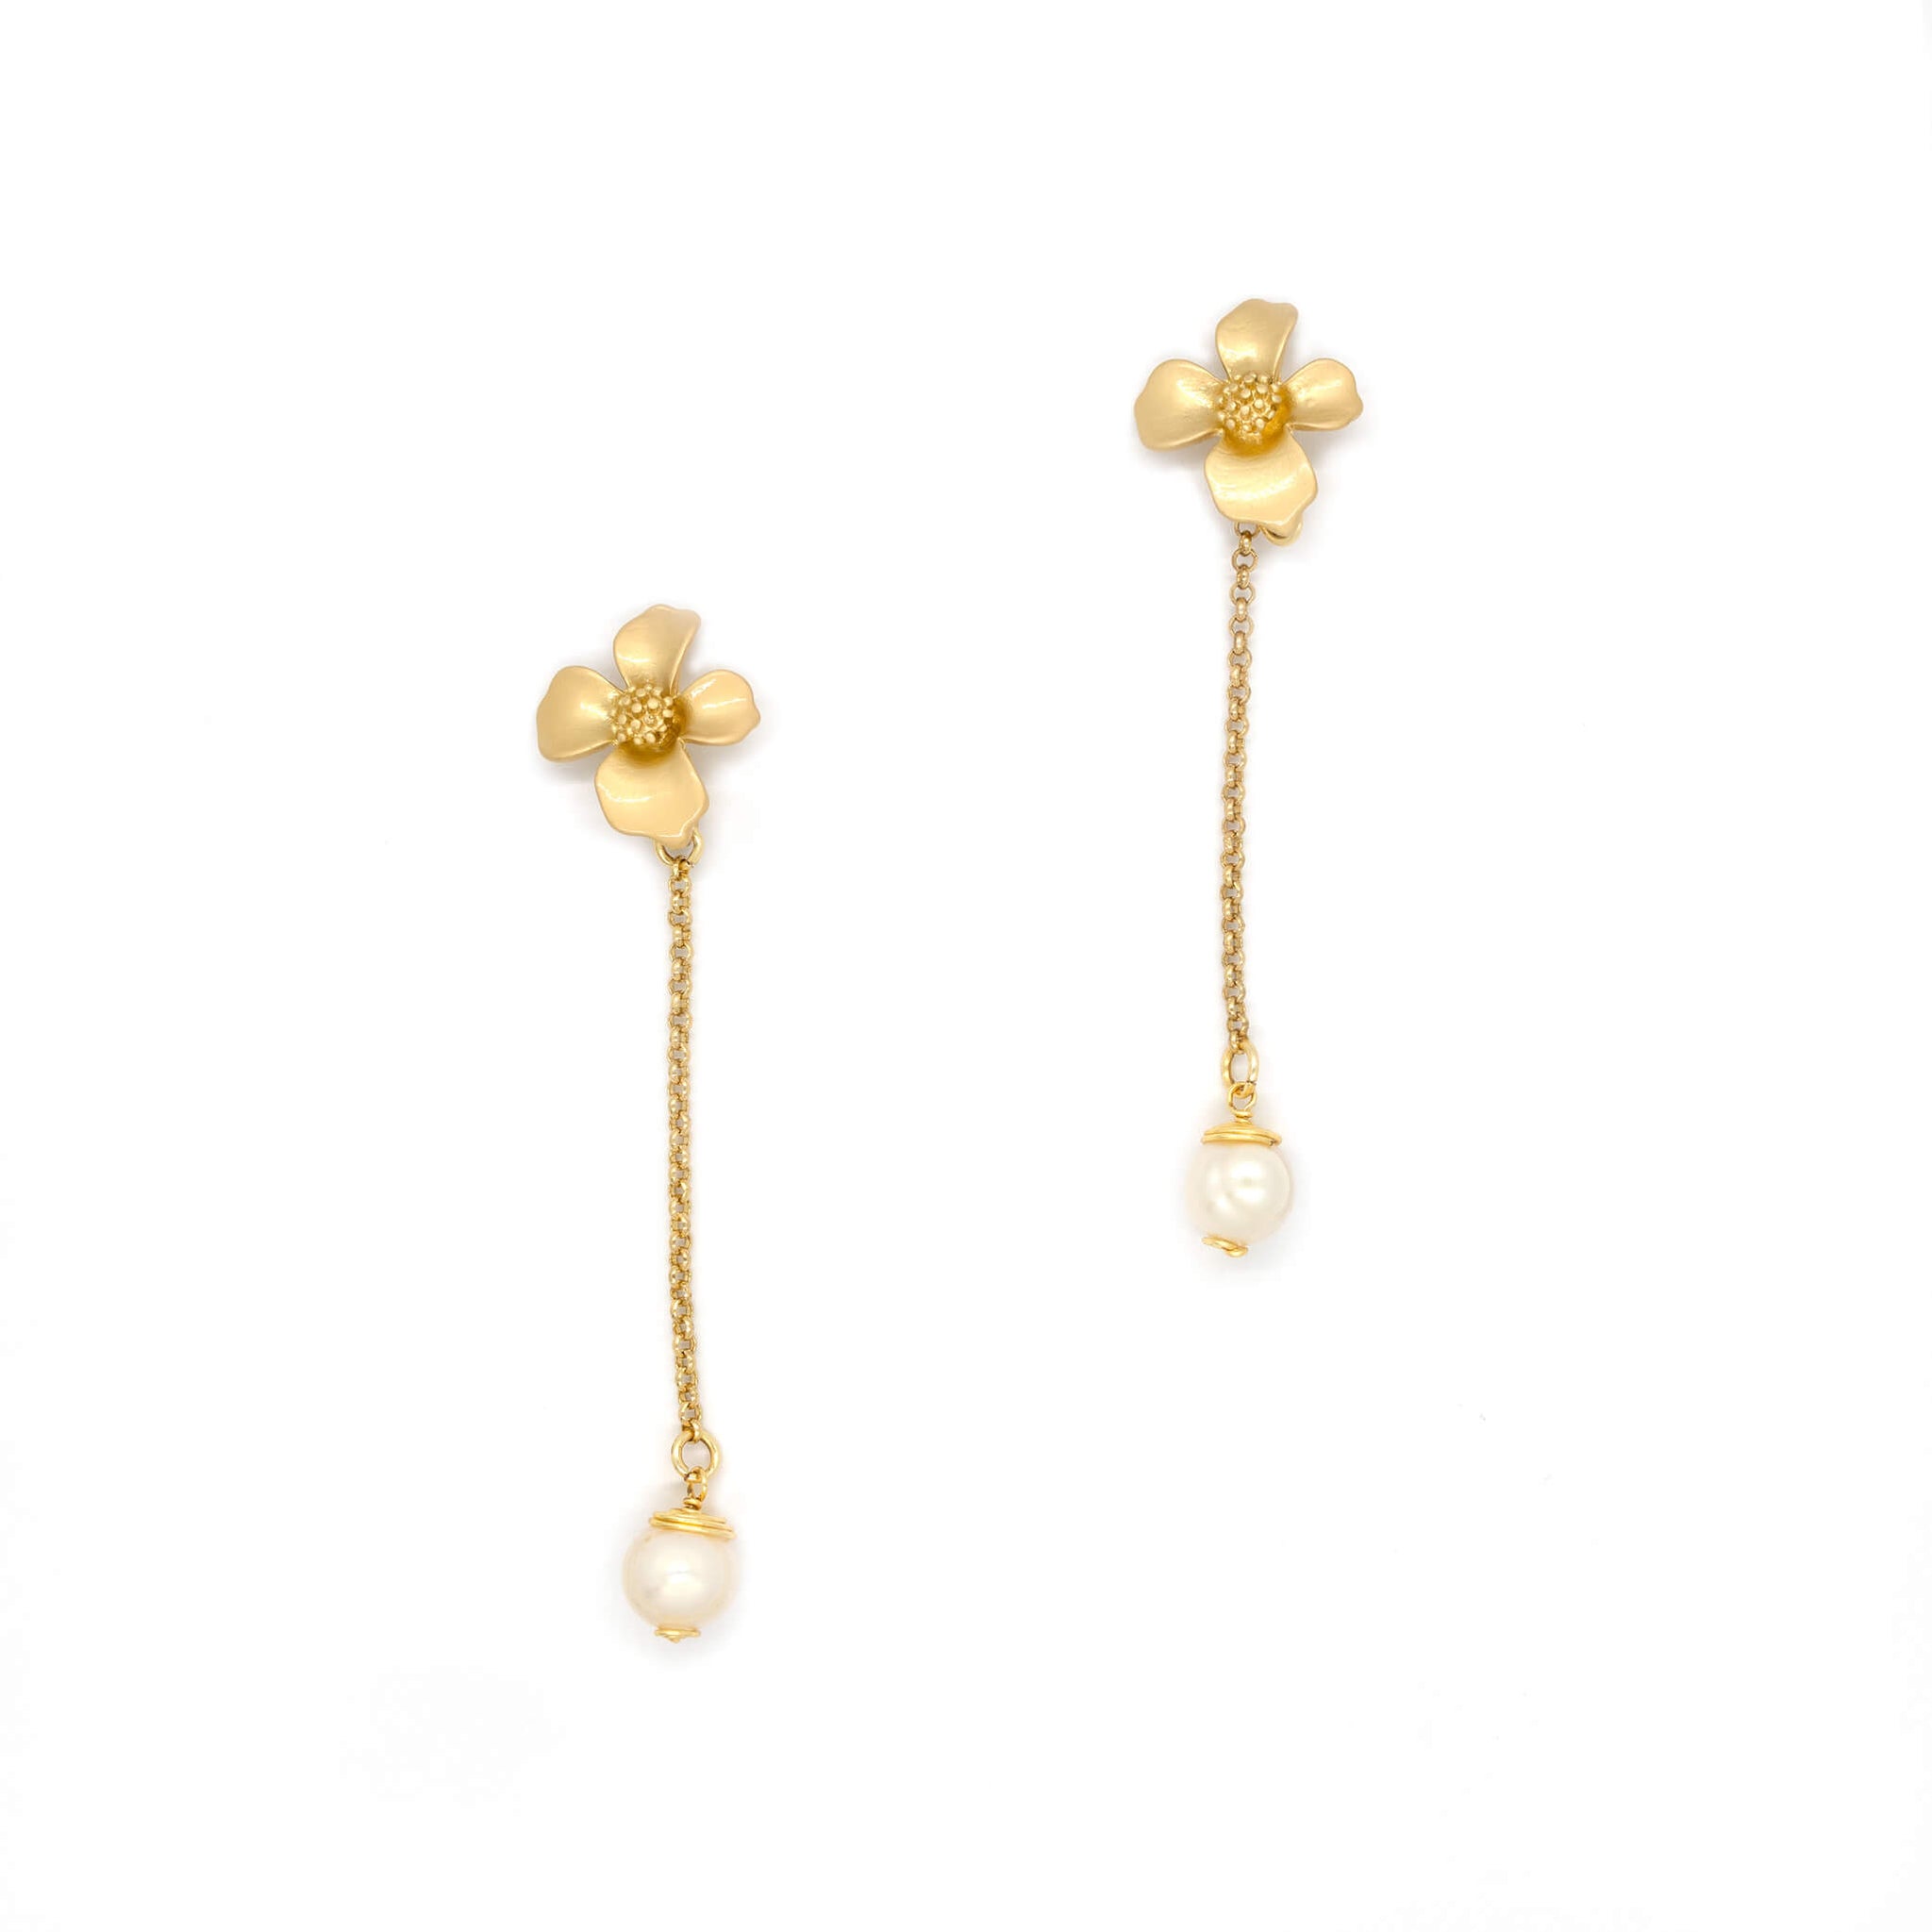 Chloe drop Earrings are 3 inches long. Gold and White earrings. Handmade with 22kt gold-plated chain, freshwater Pearl, and hypoallergenic studs. Minimalist Earrings.